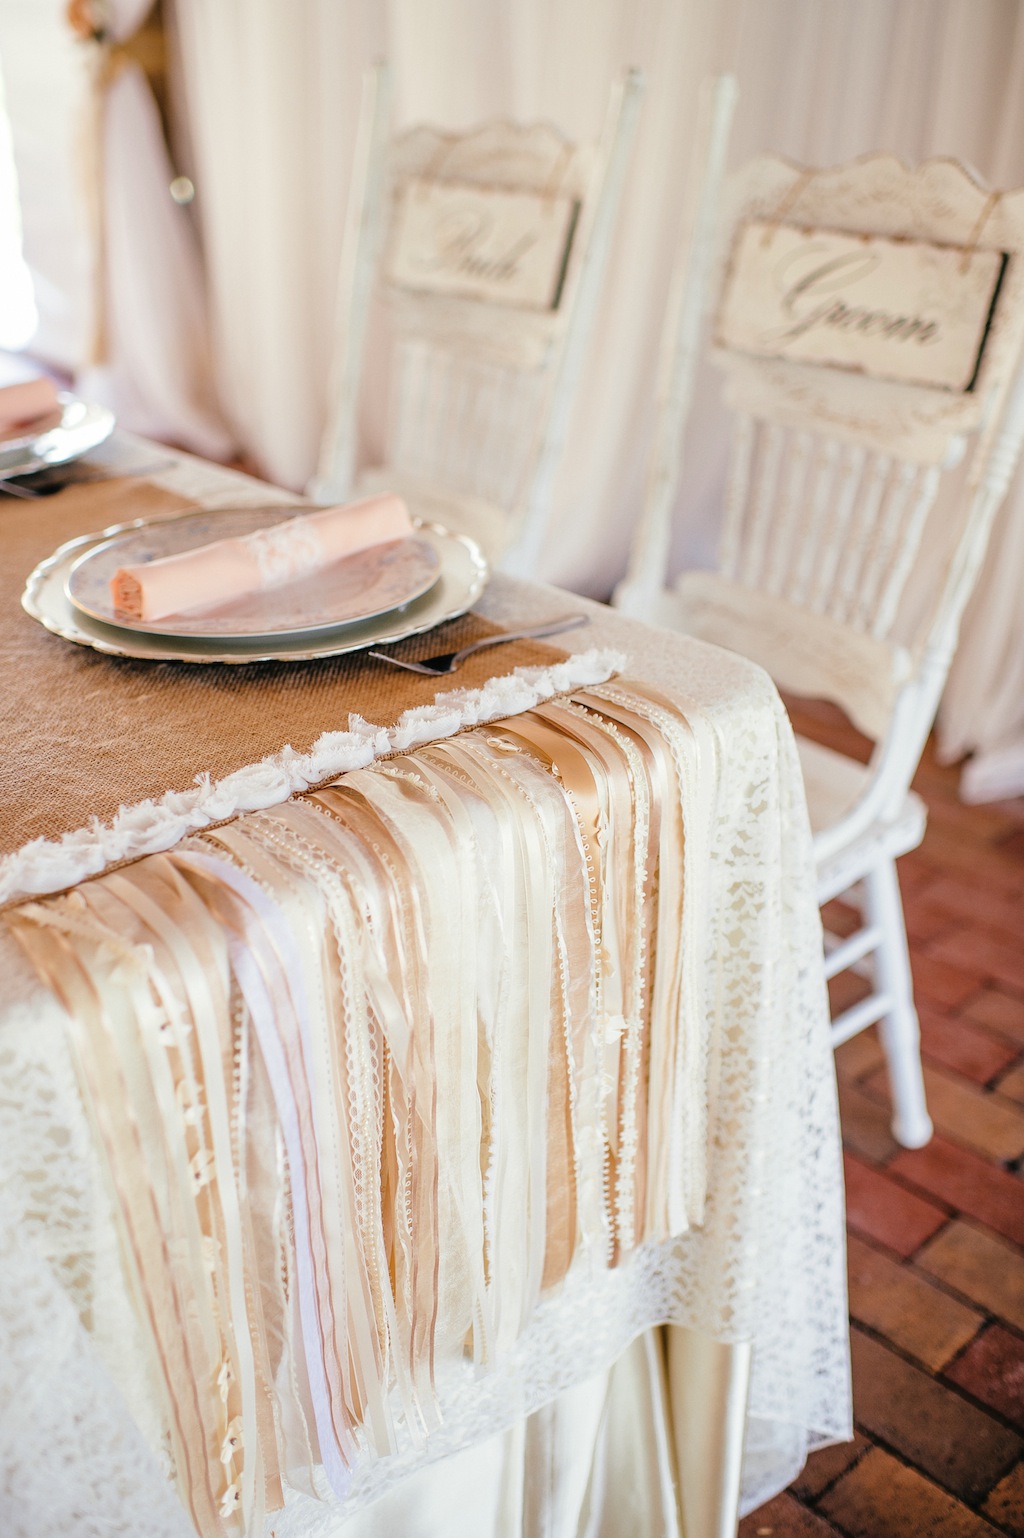 Cross Creek Ranch Wedding near Tampa Bay, Fl - Rustic Rose, Burlap and Lace by Lakeland Wedding Photographer Sunglow Photography (31)